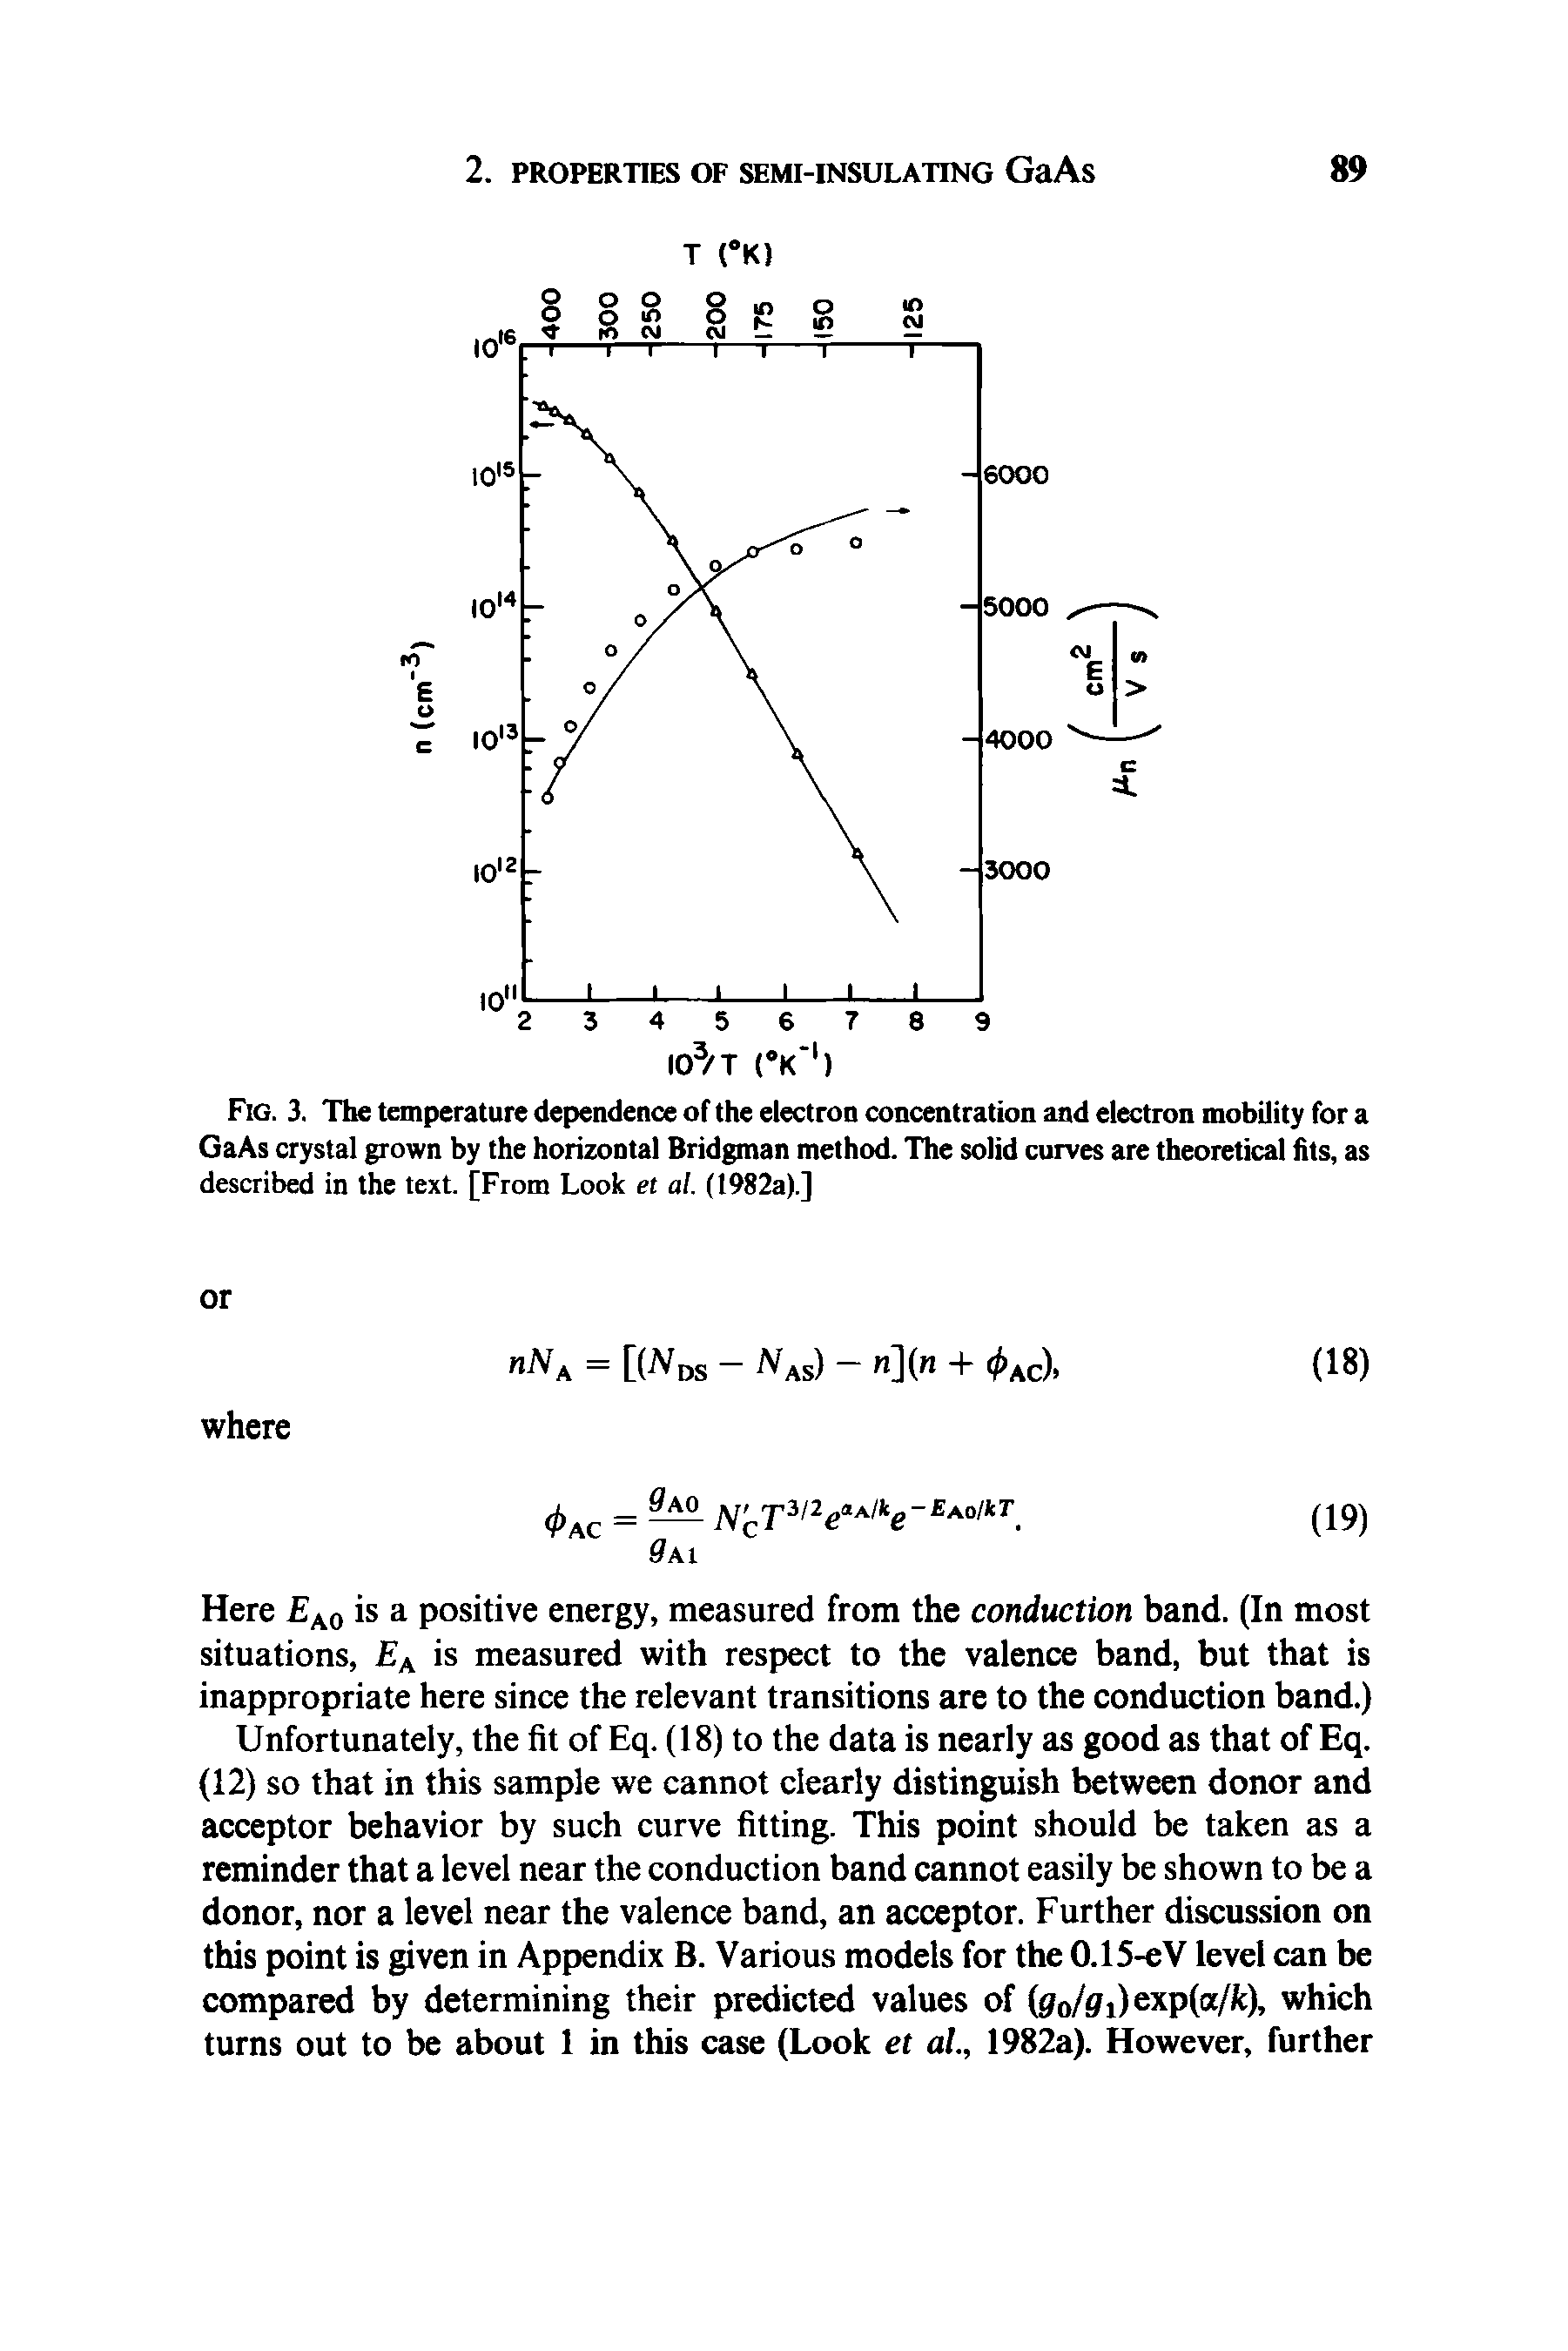 Fig. 3. The temperature dependence of the electron concentration and electron mobility for a GaAs crystal grown by the horizontal Bridgman method. The solid curves are theoretical fits, as described in the text. [From Look et al. (1982a).]...